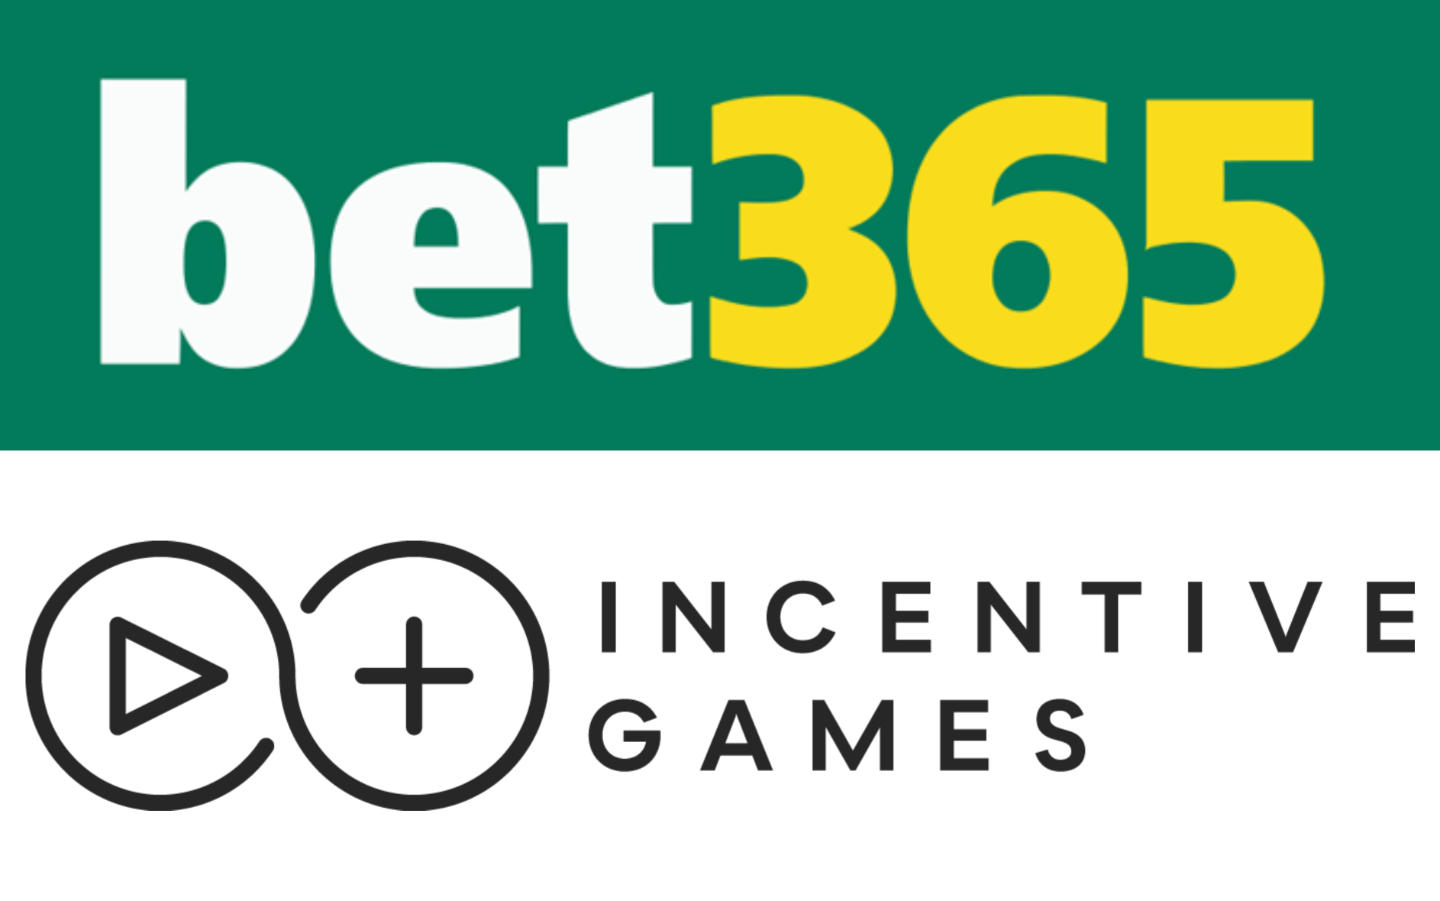 Play Your Favorite Casino Games At Bet365: The Ultimate Gaming Destination